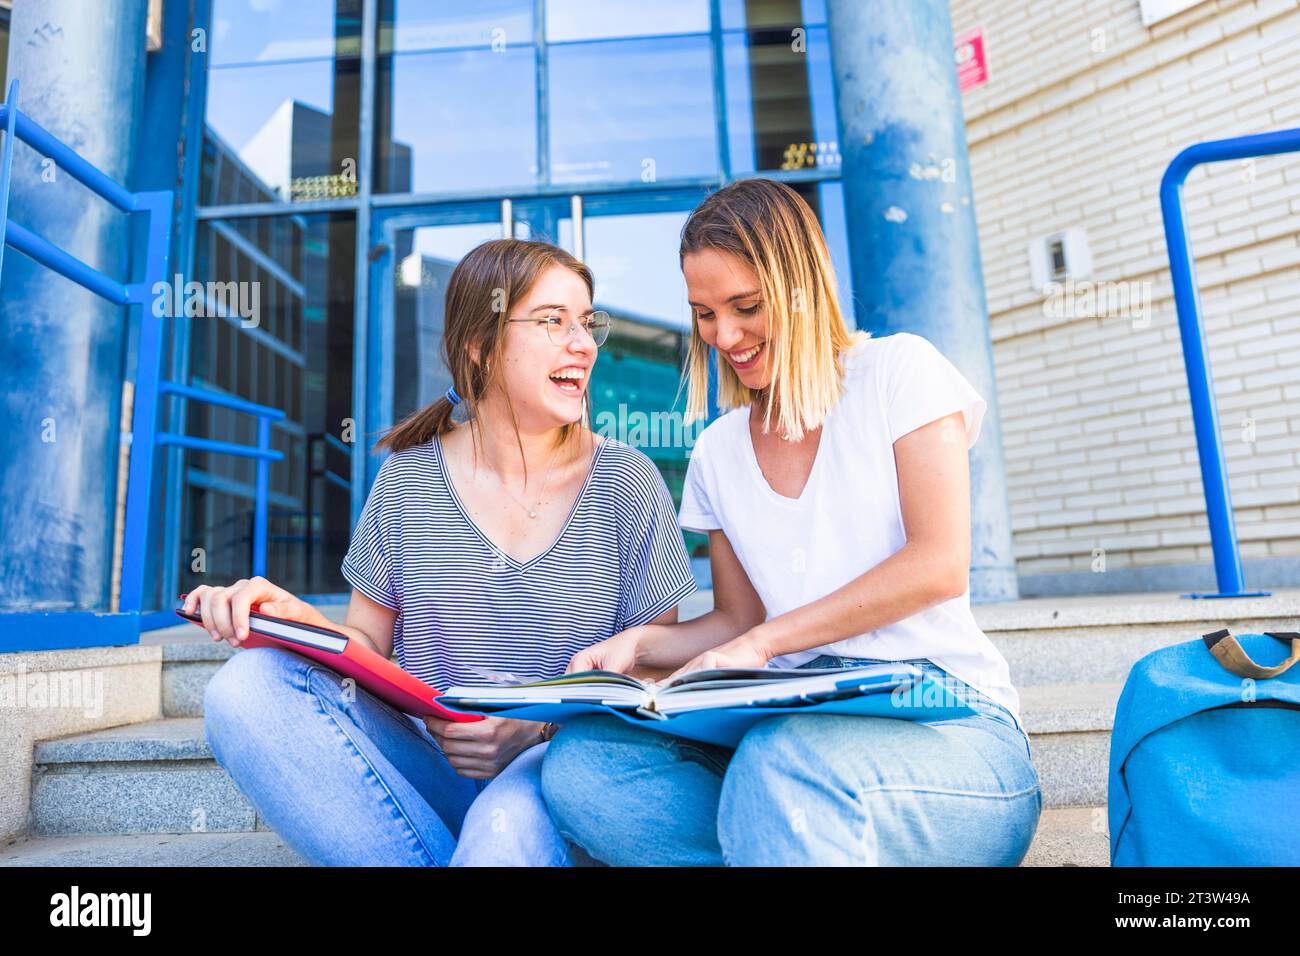 Women reading textbook laughing Stock Photo